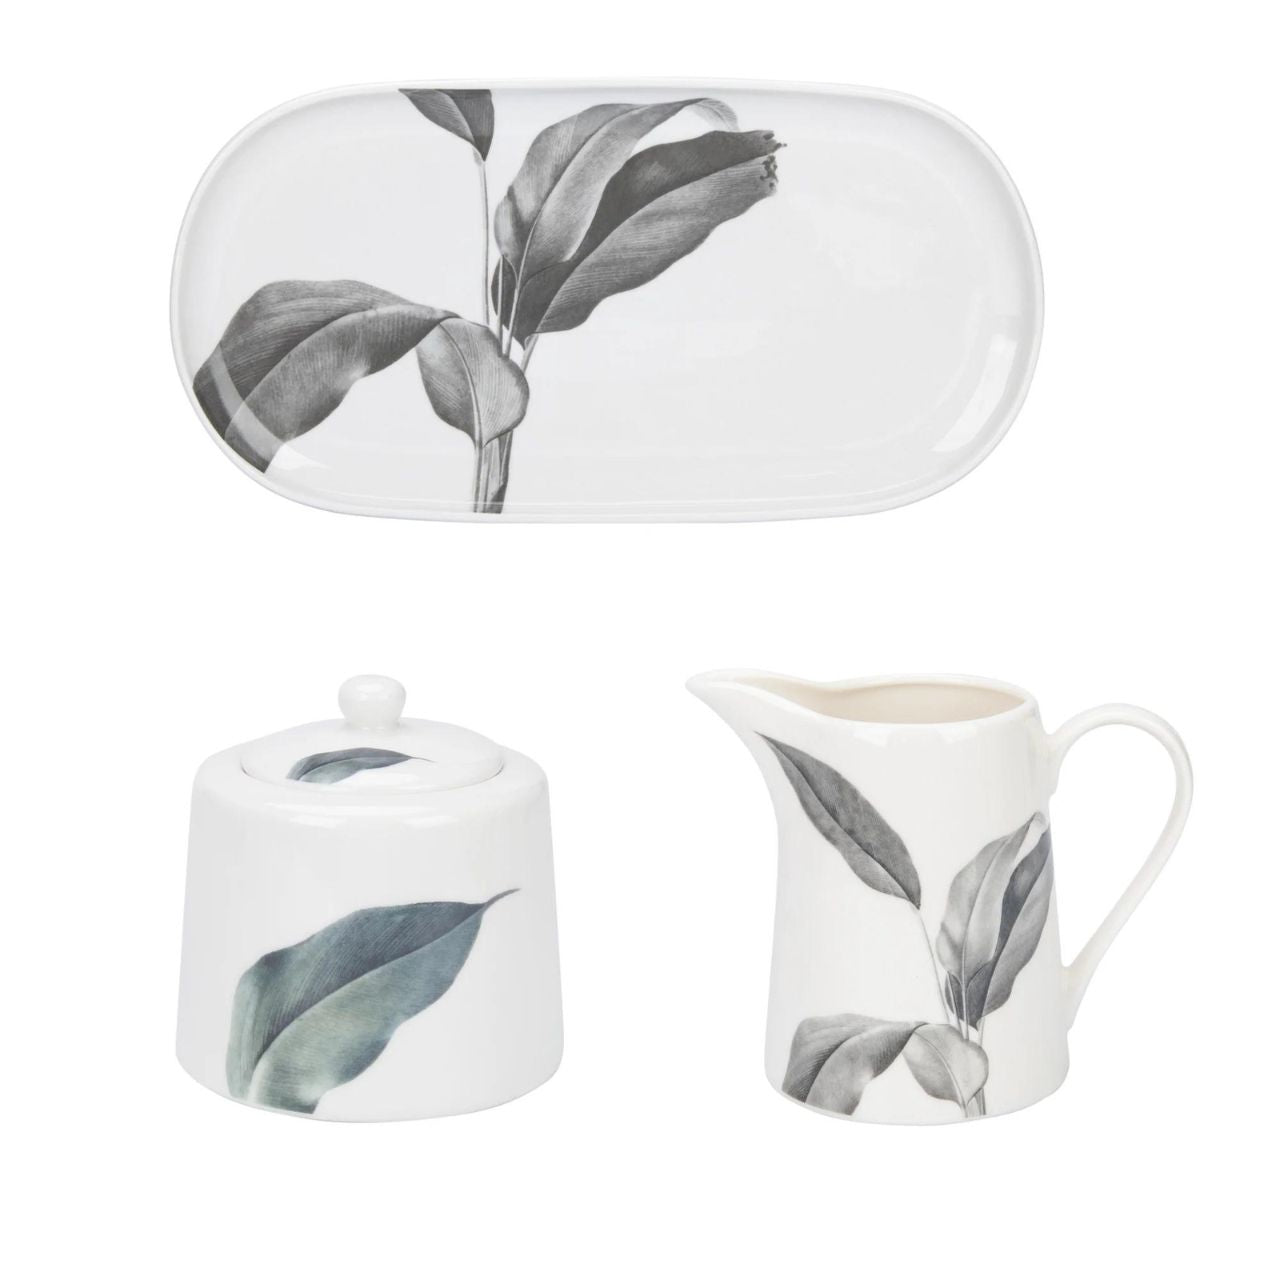 Birds of Paradise Sugar Bowl, Creamer and Serving Tray Set  Latest addition to the Birds Of Paradise Tabletop Collection. A stunning Sugar Bowl, Milk Jug and Serving Tray Set.  - Inspired with classic shades of green, gold & grey. - Ideal house warming gift, new home, birthday, or general occasion.